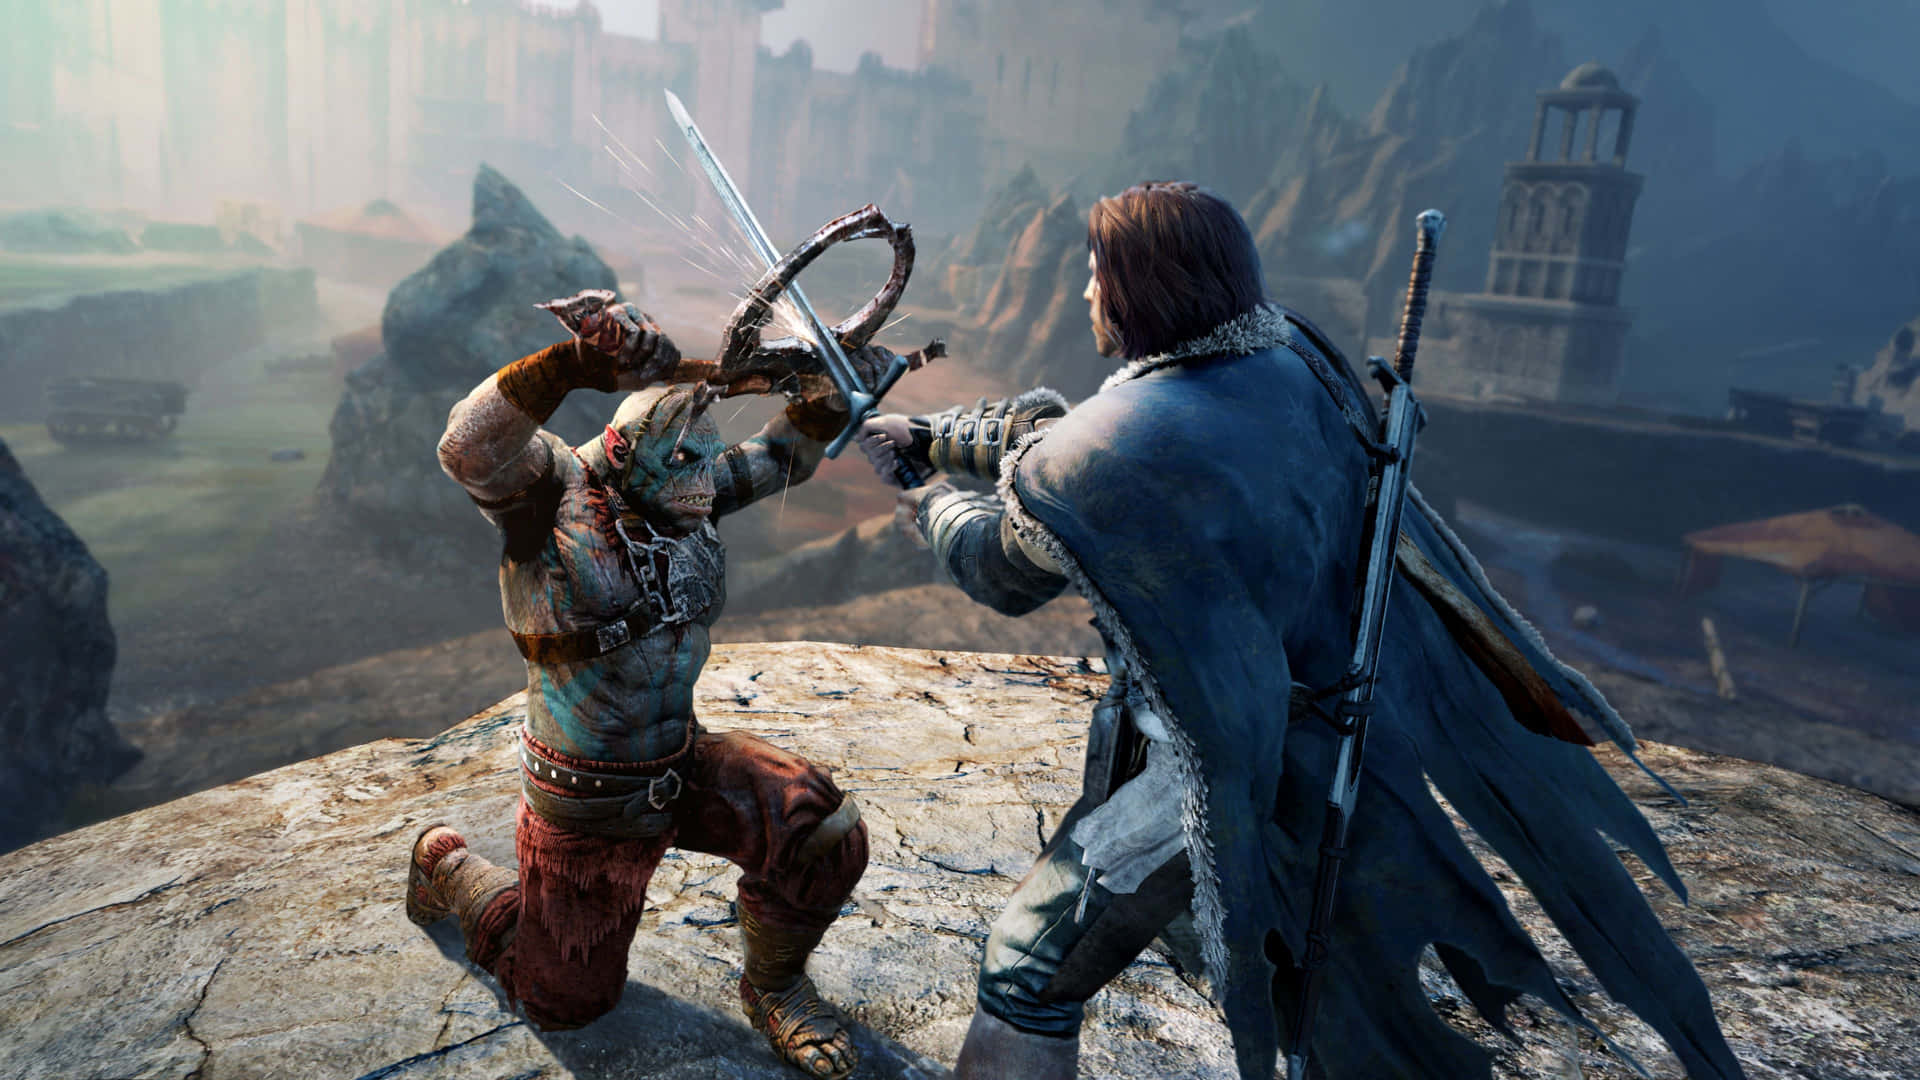 Immerse yourself in the world of Middle-Earth in Best Shadow Of Mordor